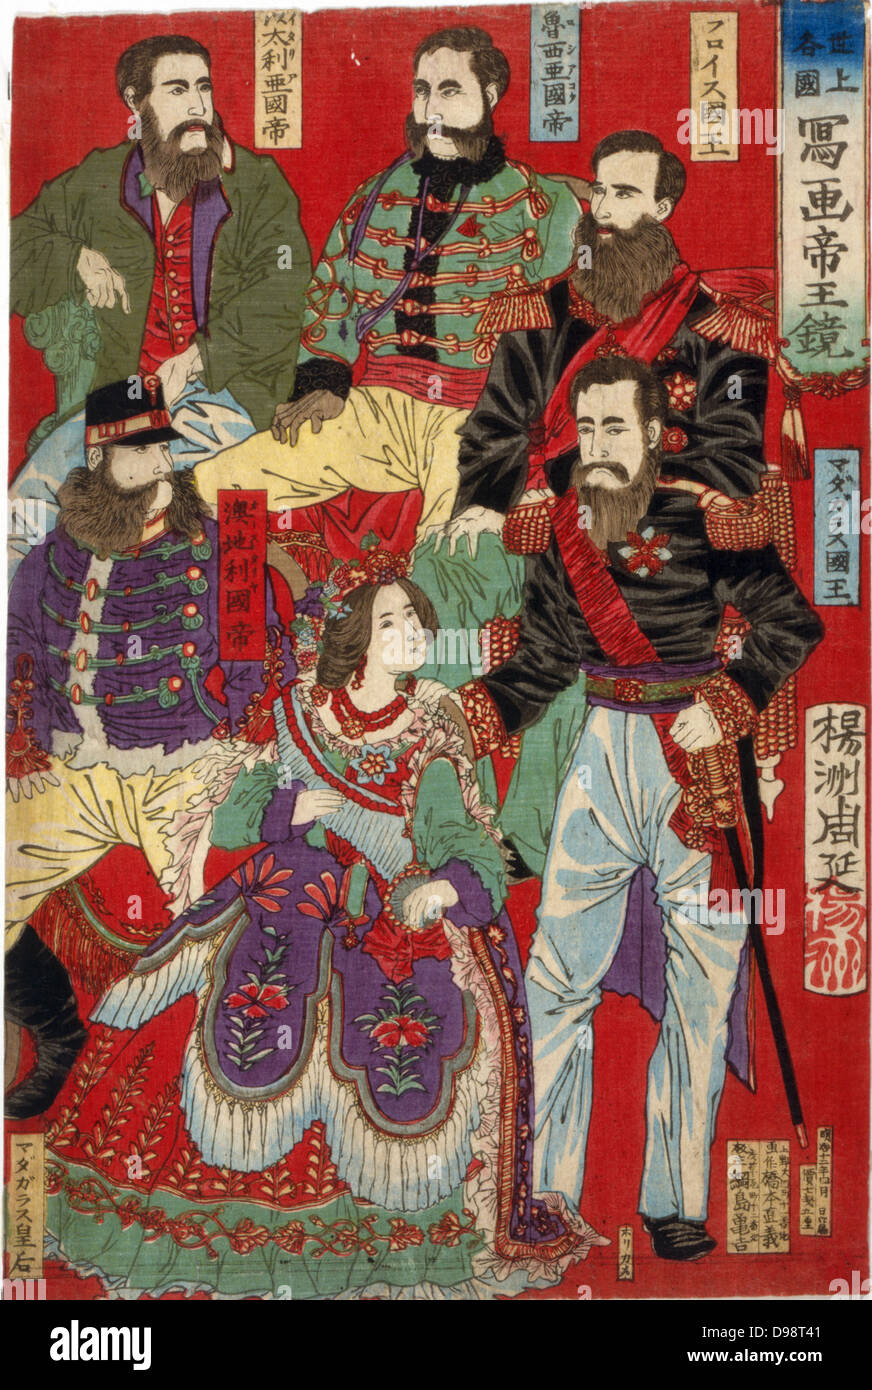 Section of triptych of world leaders with labels such as Emperor of Italy, Emperor of Austria, Queen of Madagarasu, King of Turkey, 1879. Chikanobu Hashimoto (1838-1812) Japanese artist. Stock Photo